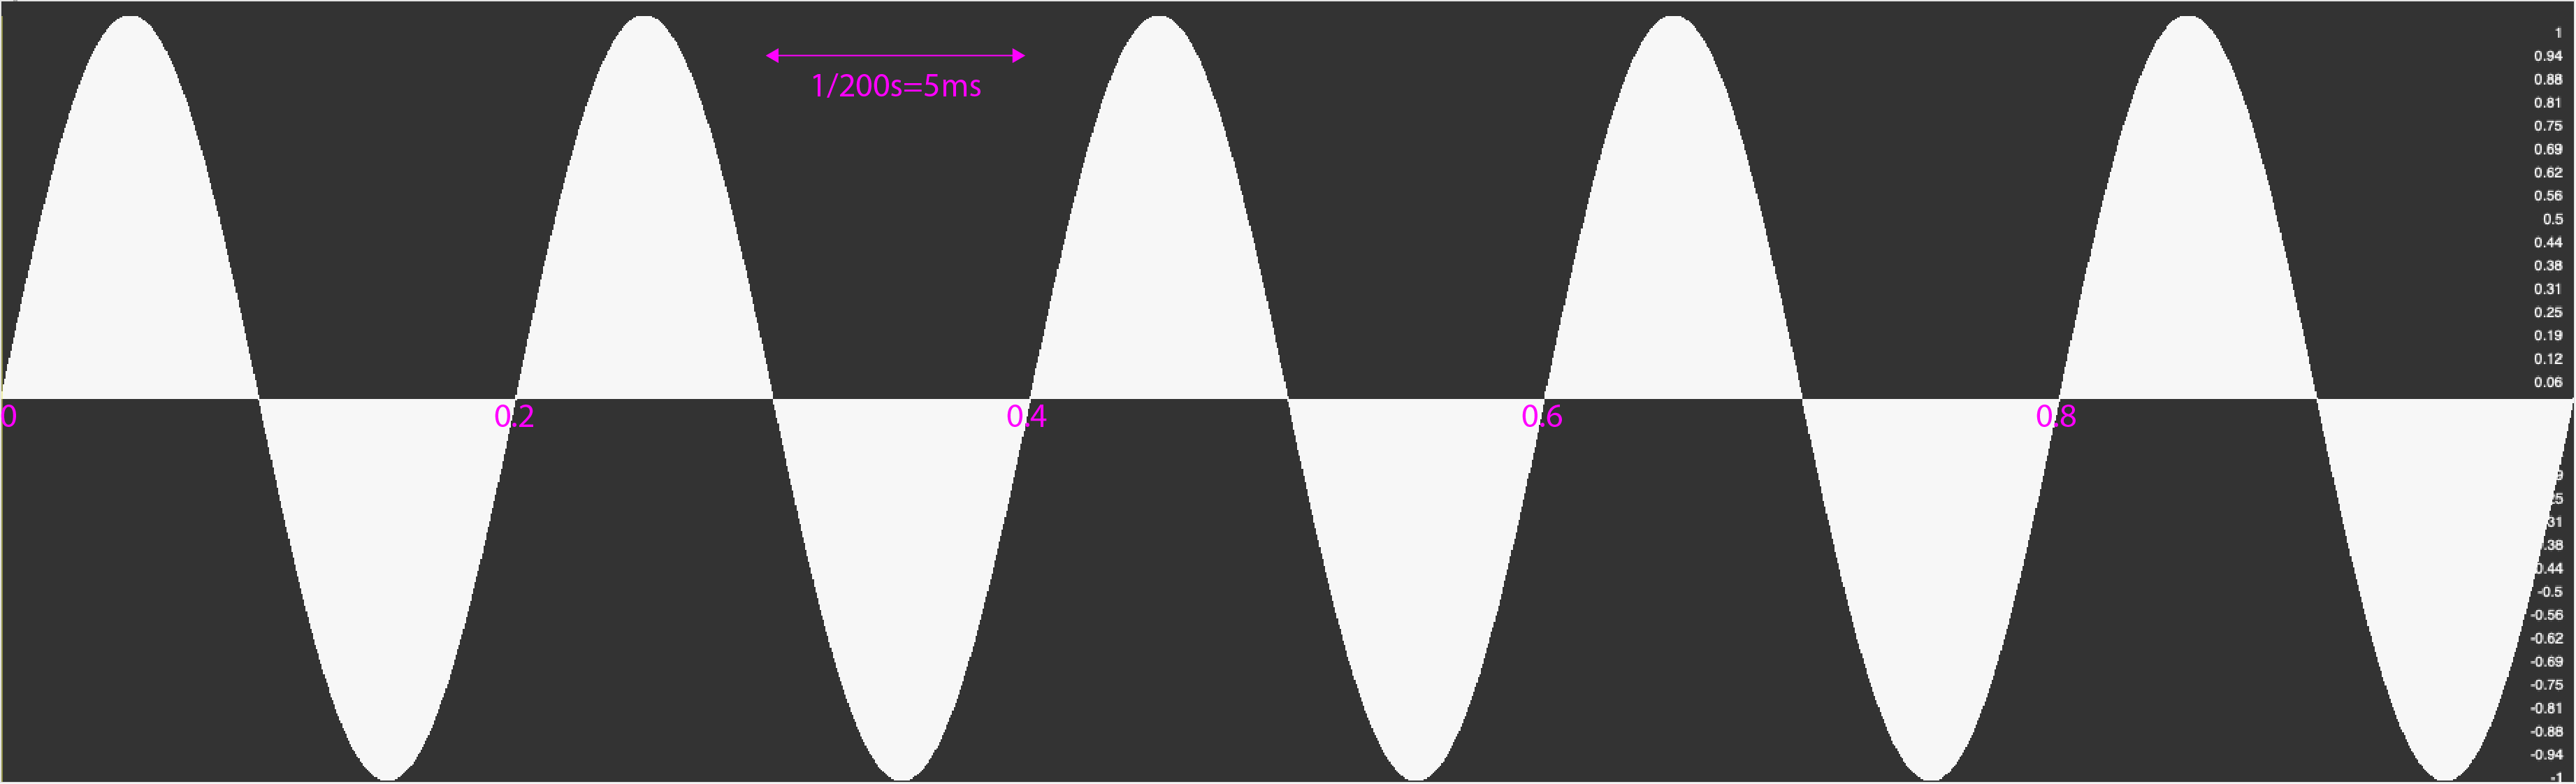 Periodic waveform of a simple tone